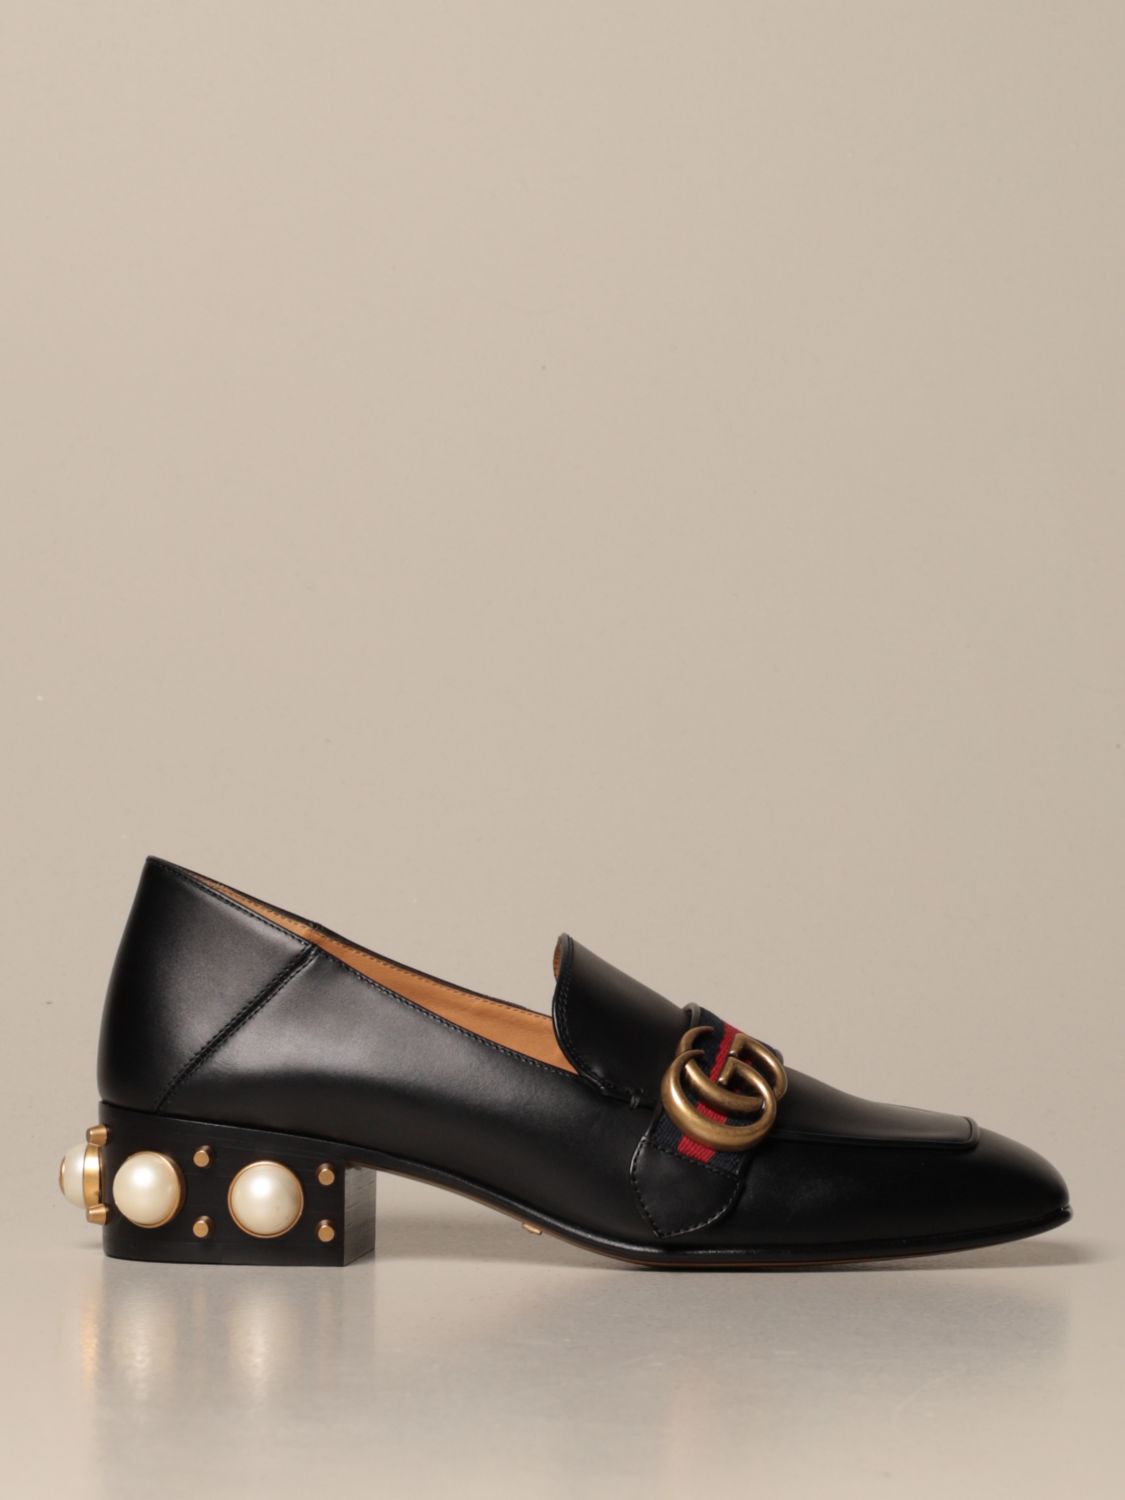 GUCCI GG Marmont Leather Outlet Loafer & Moccasin Shoes